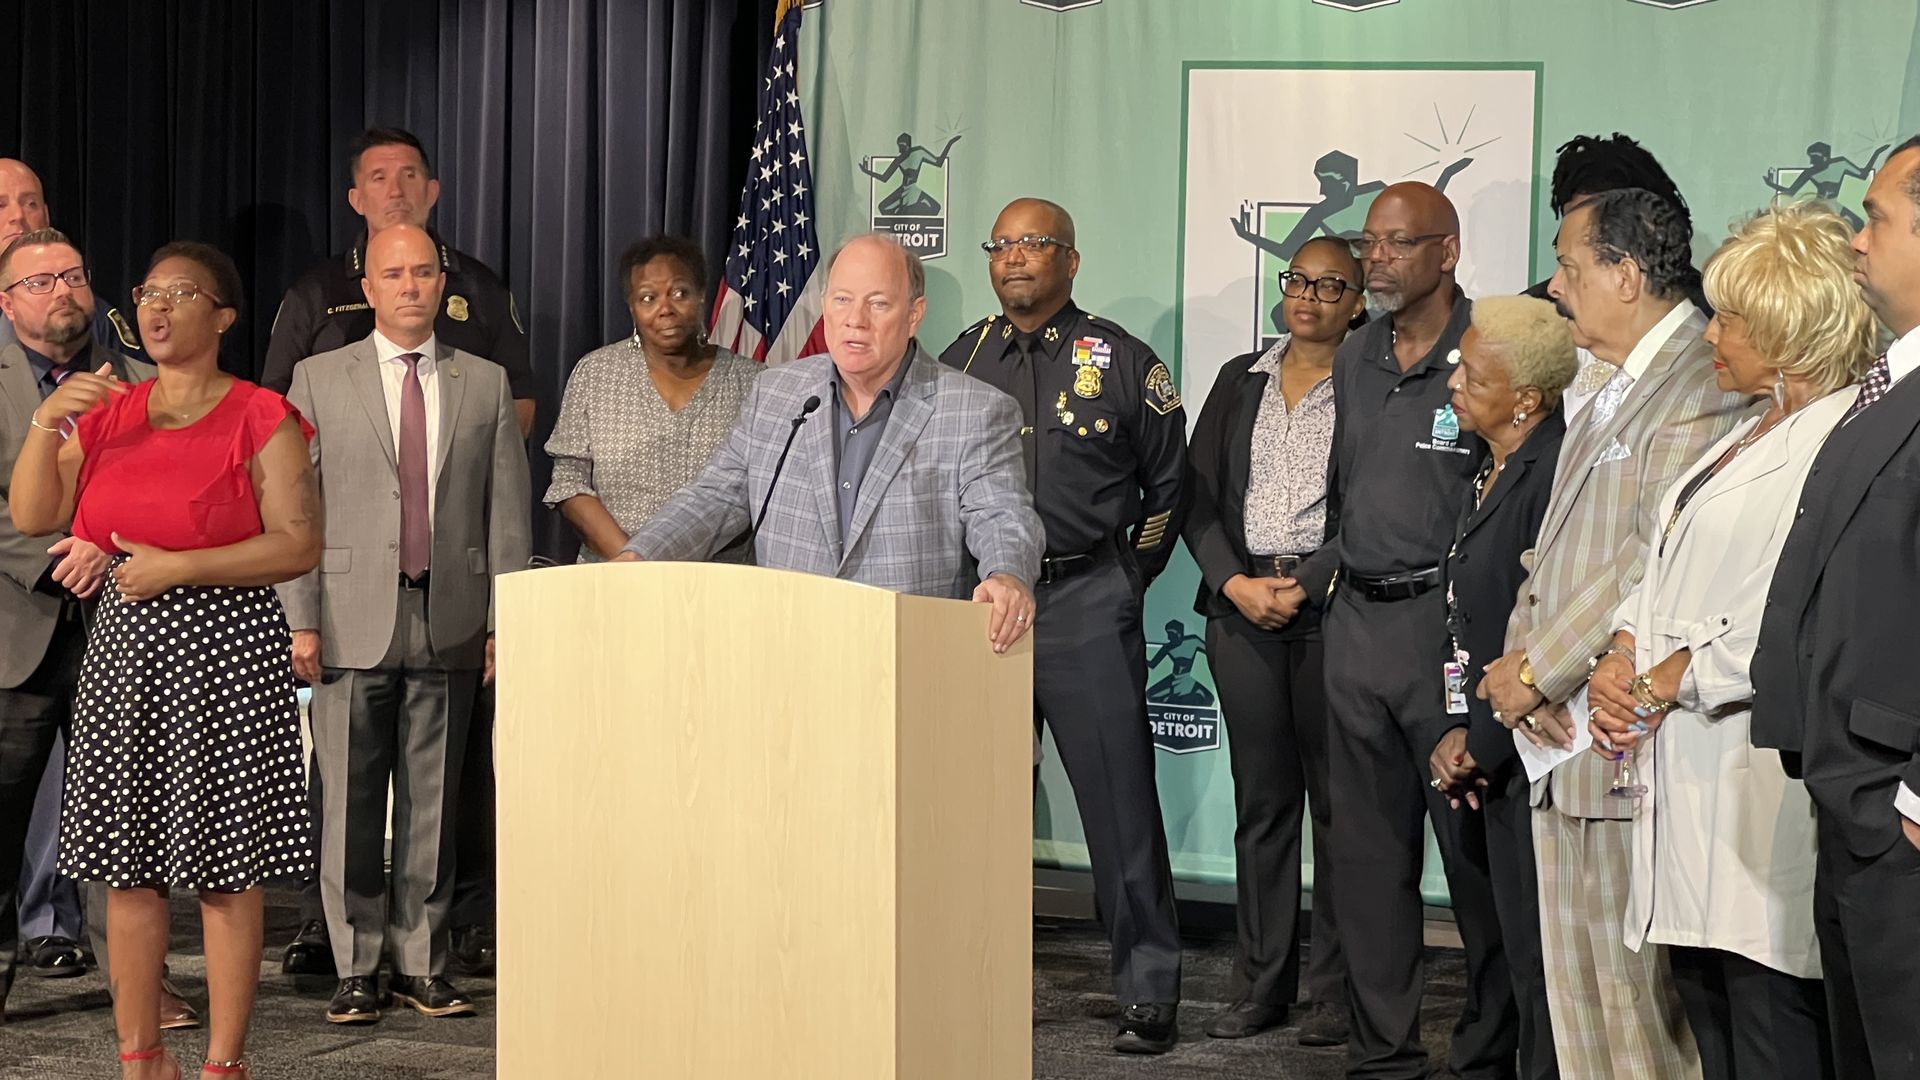 Mayor Mike Duggan stands behind the podium in front of a group of city officials including Detroit police chief James White. 